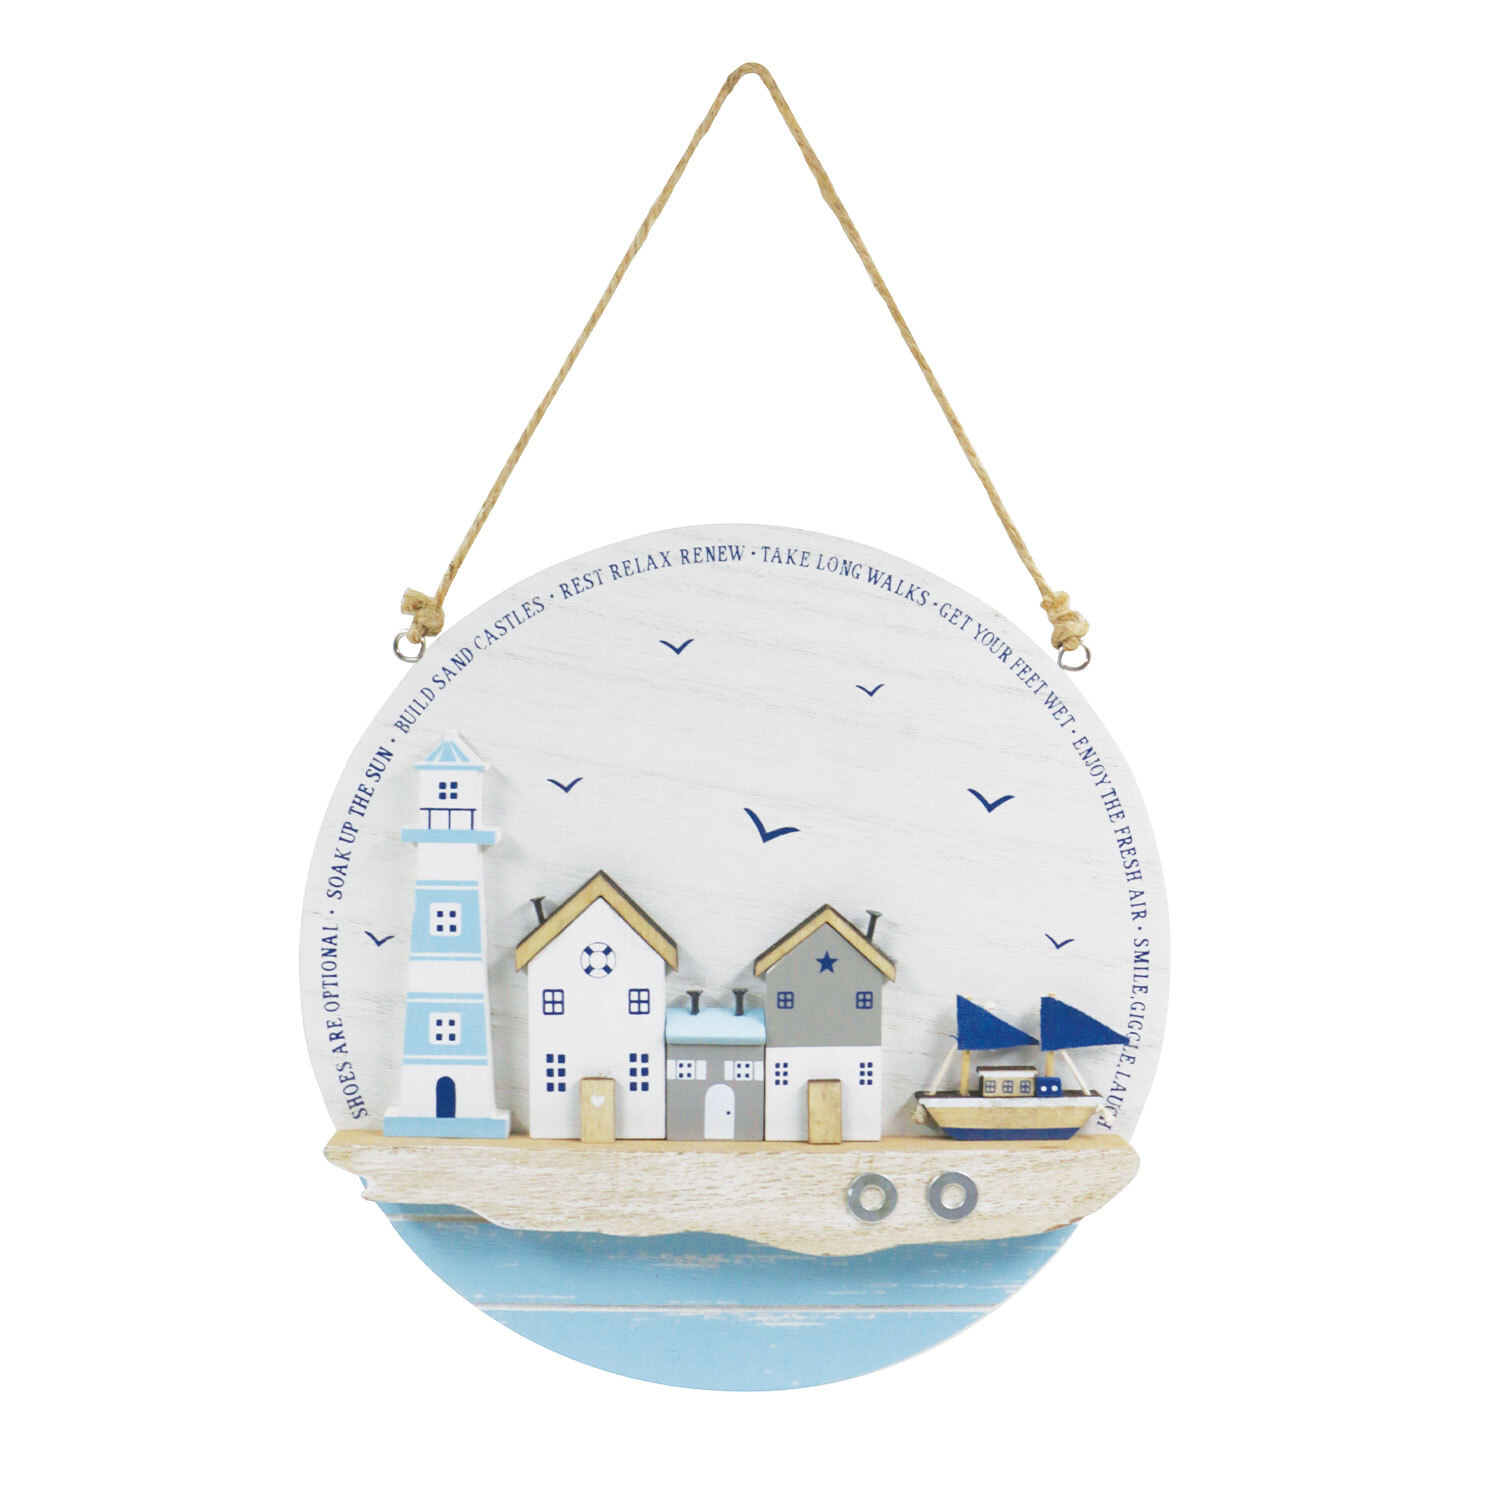 Day at the Seaside Hanging Wall Plaque Image